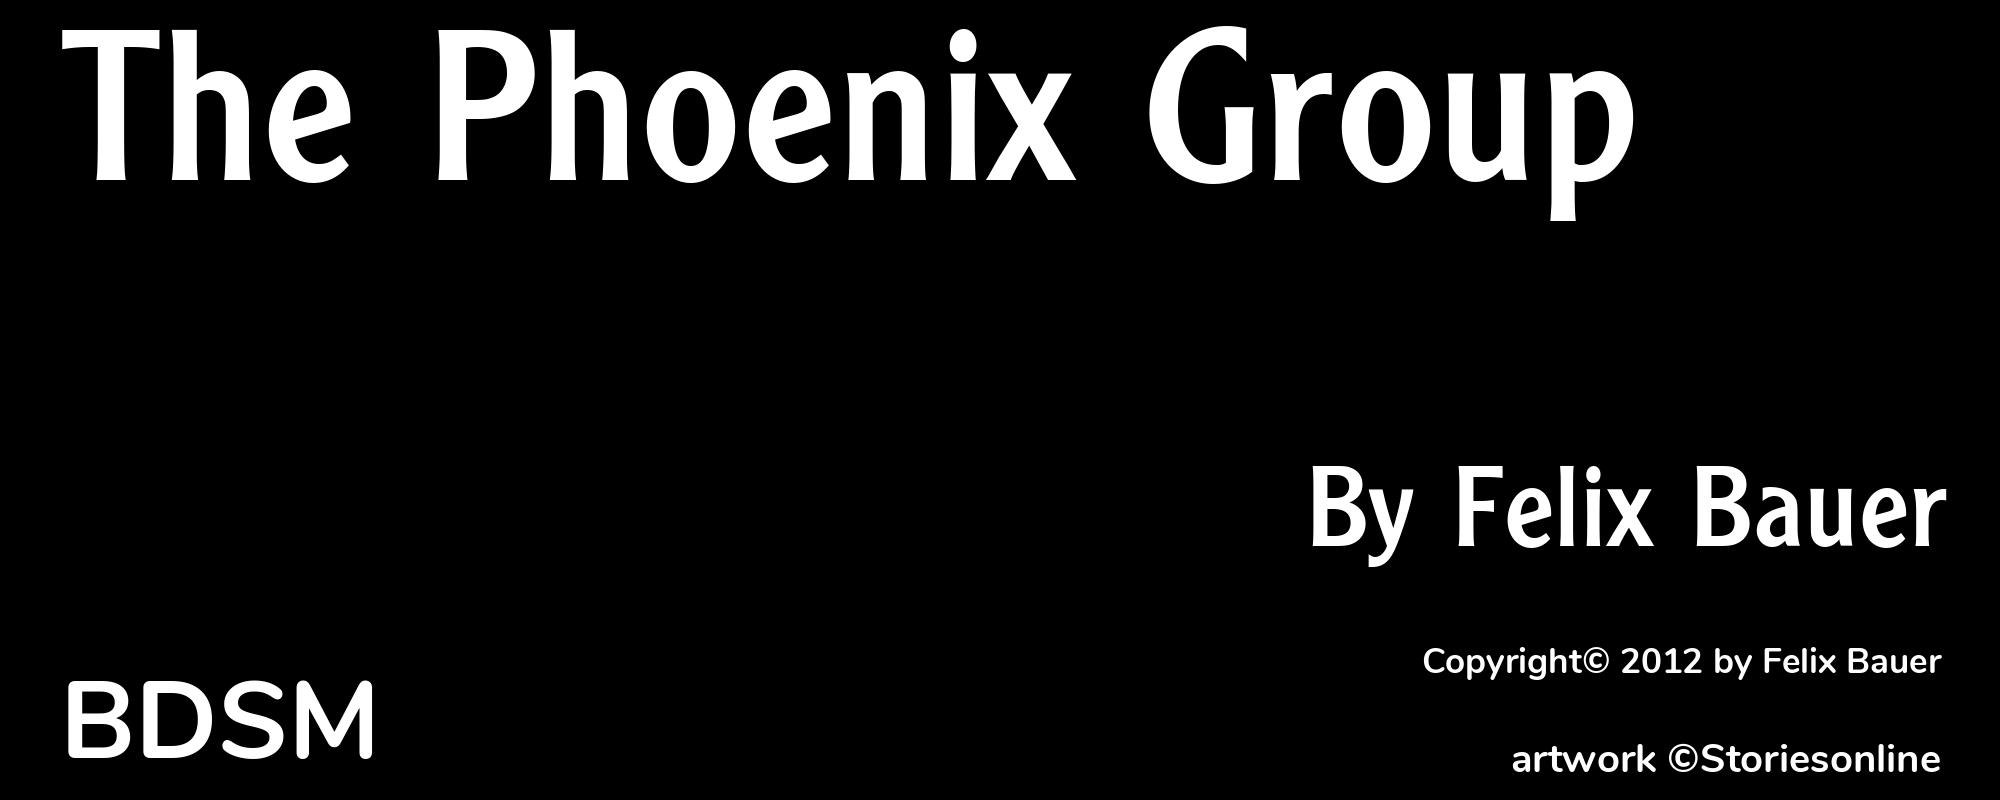 The Phoenix Group - Cover